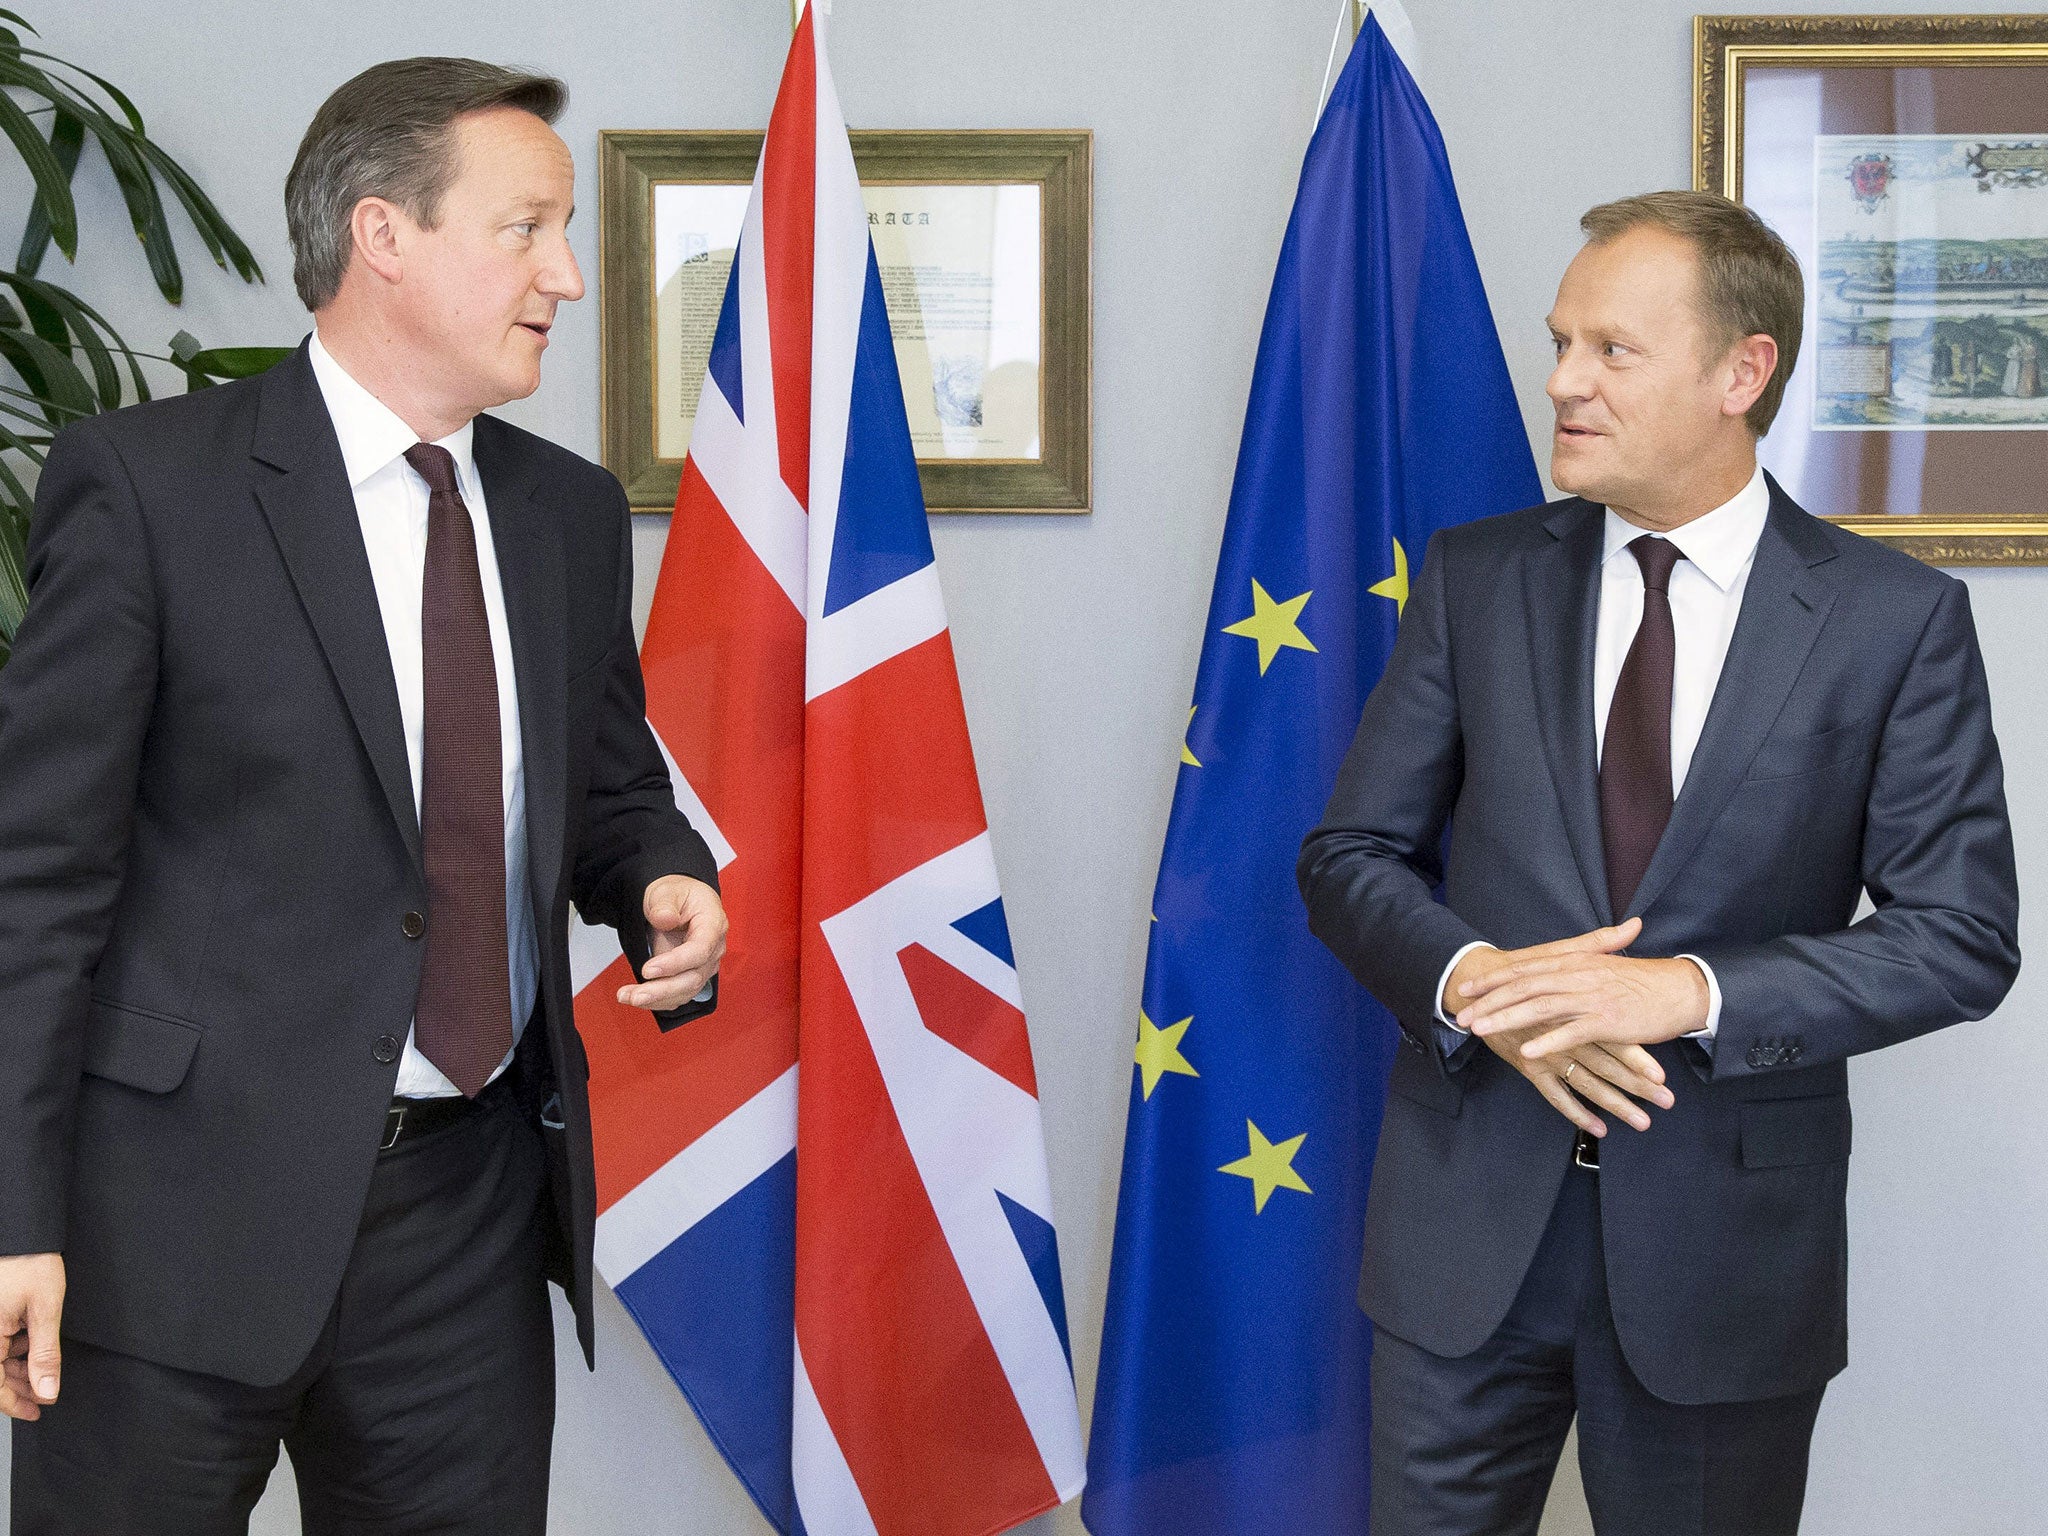 David Cameron and the president of the European Council Donald Tusk talk during an EU negotiation earlier this year